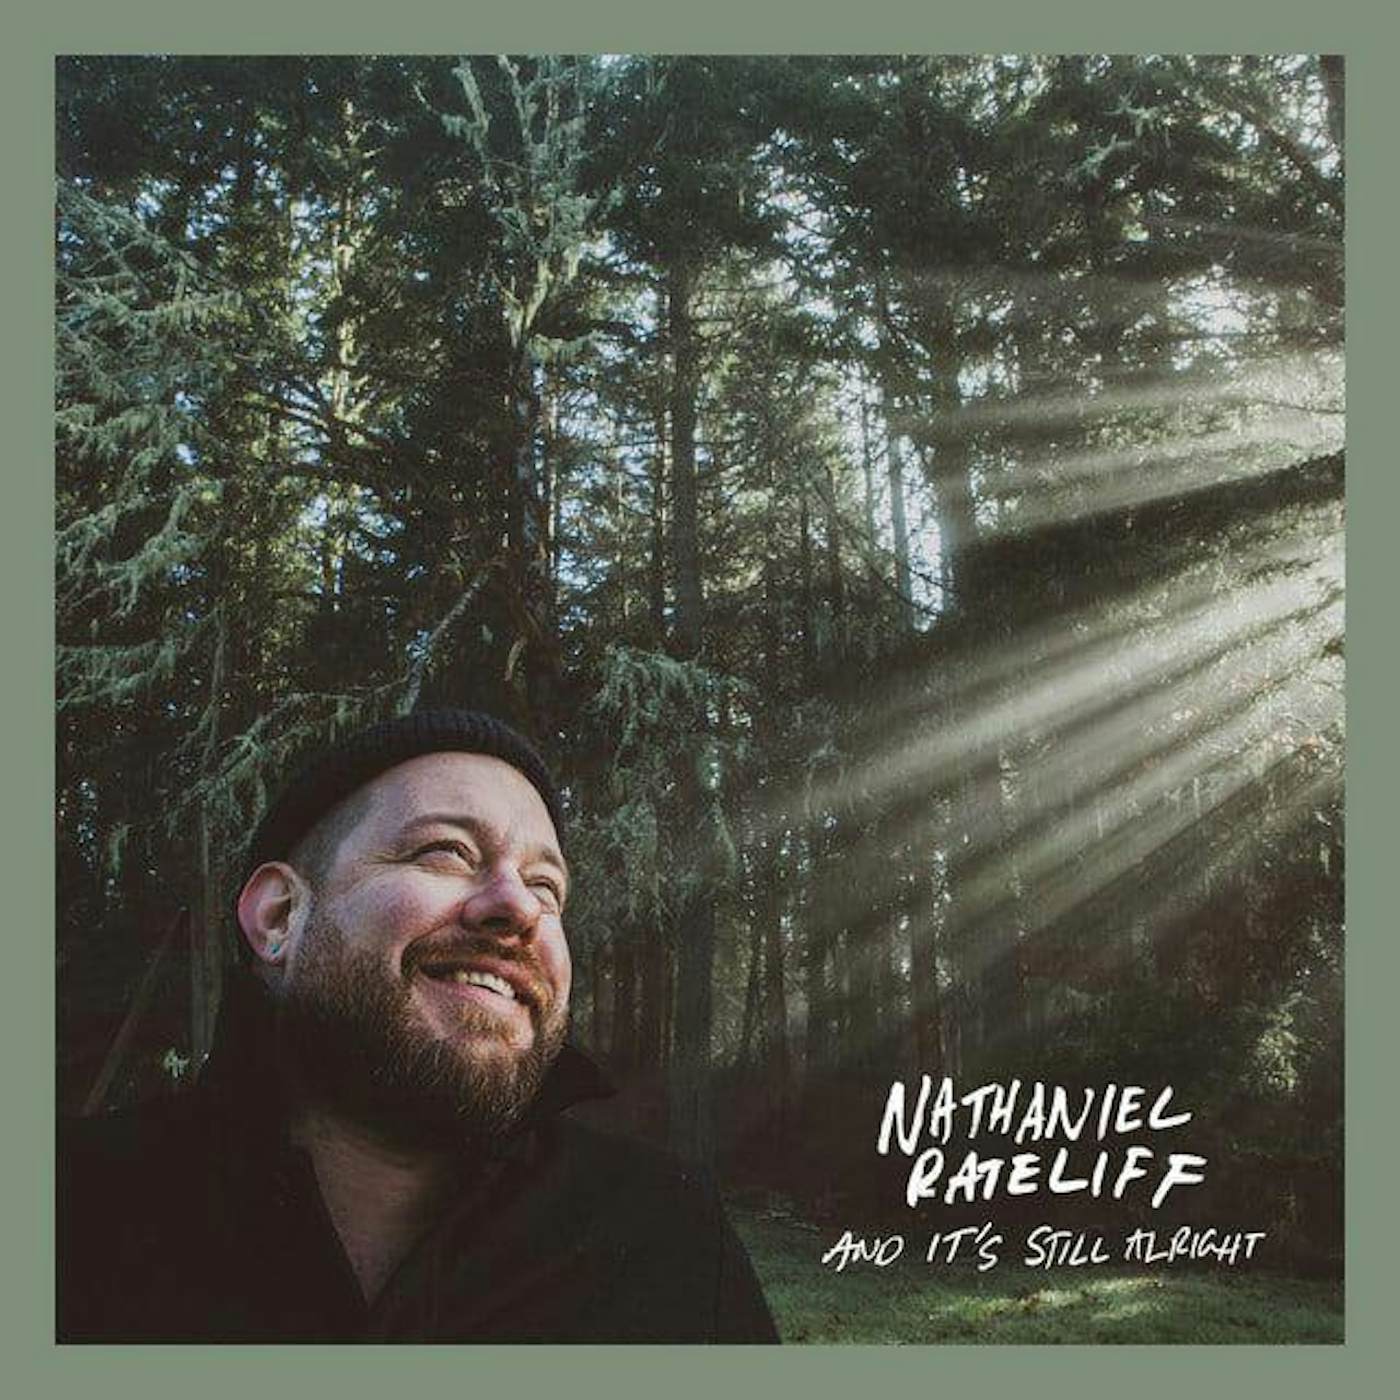 Nathaniel Rateliff And It's Still Alright Coke Bottle Clear Vinyl 180 LP